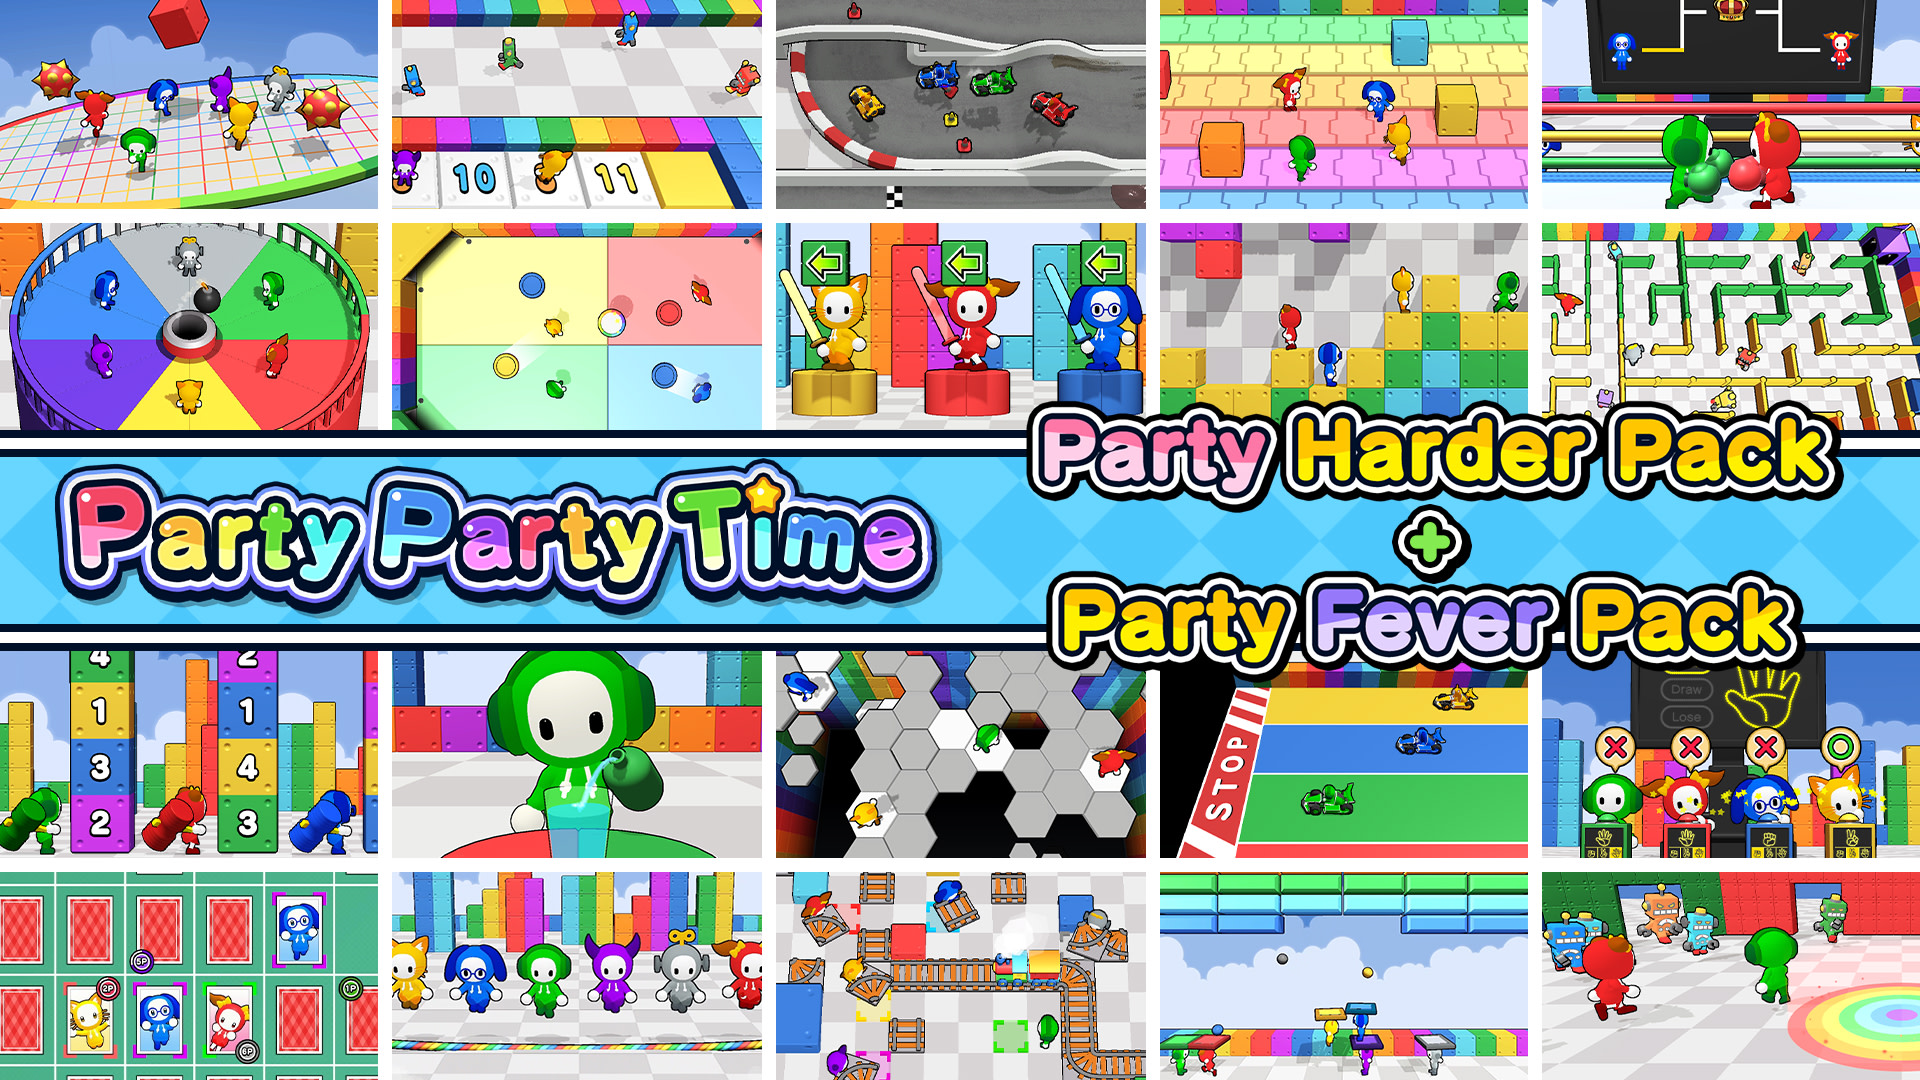 Party Harder Pack + Party Fever Pack